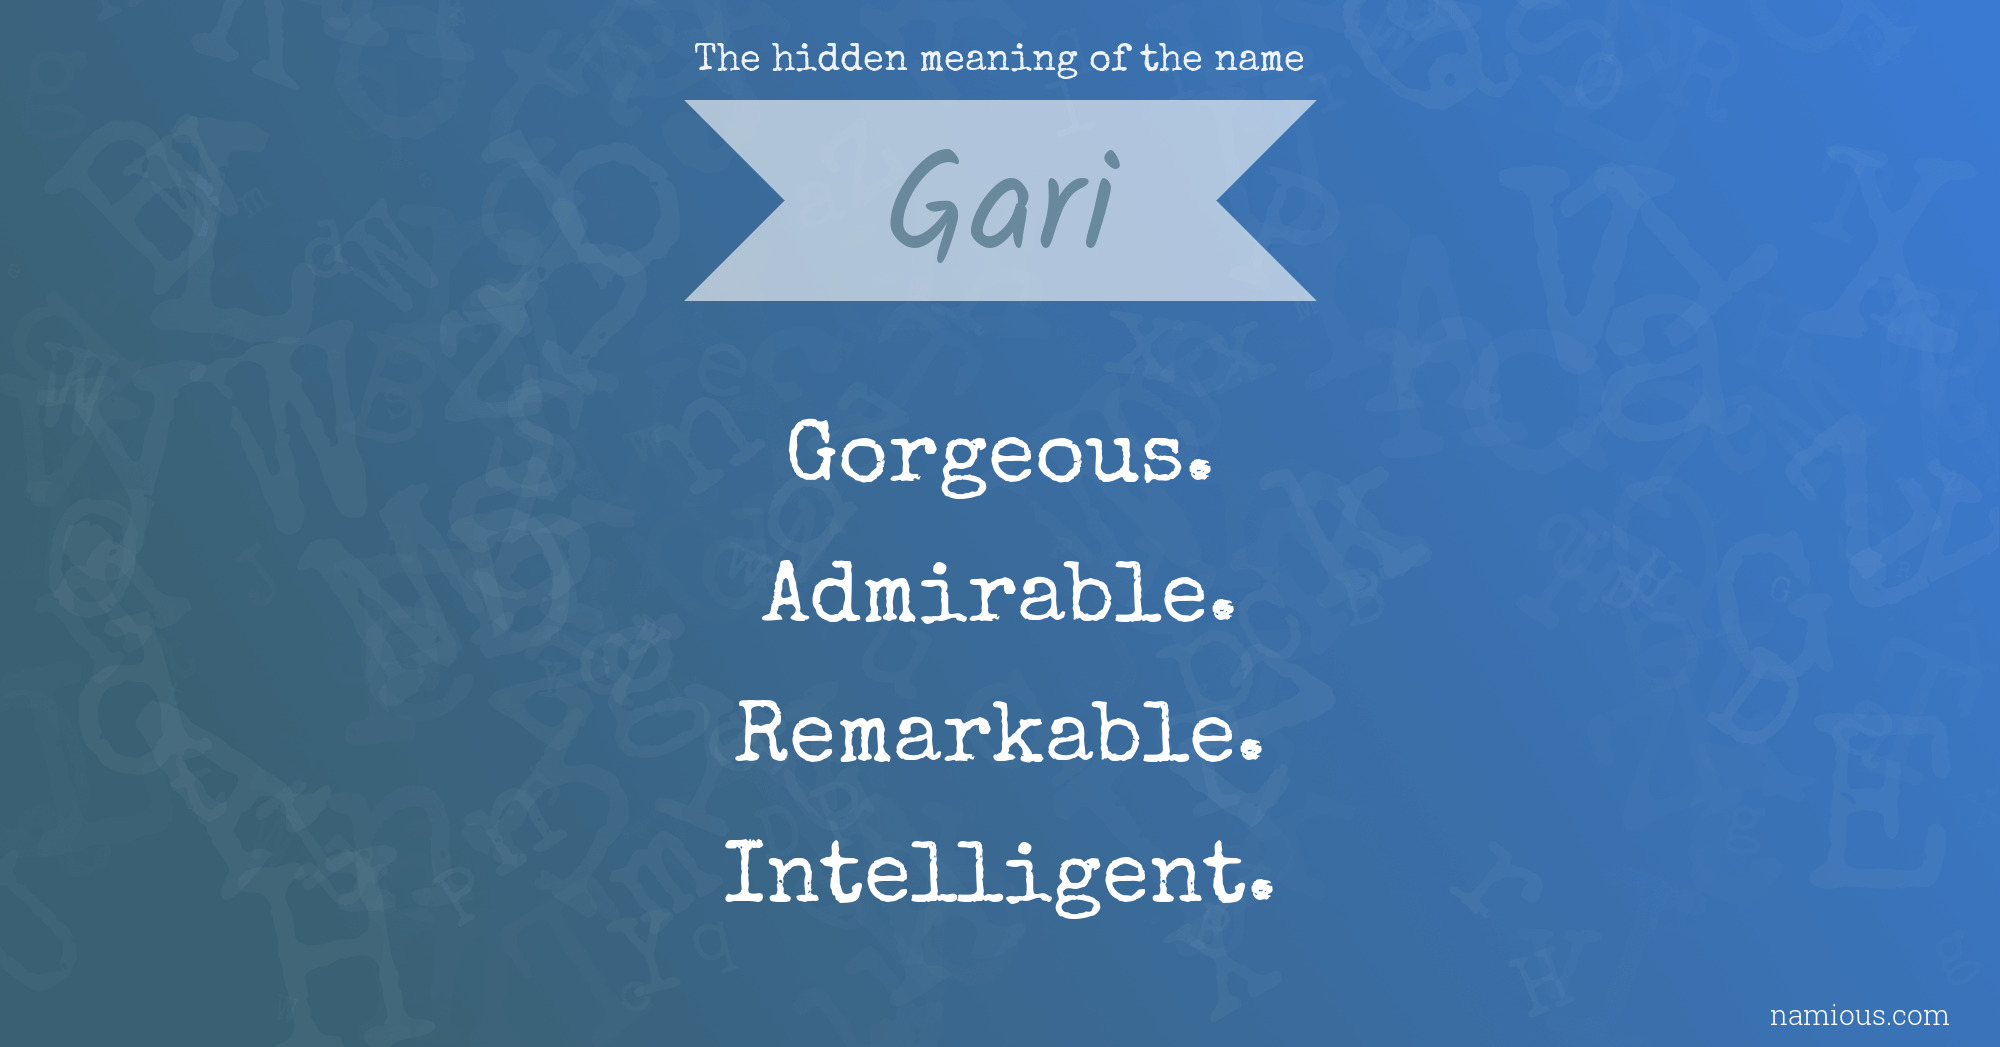 The hidden meaning of the name Gari